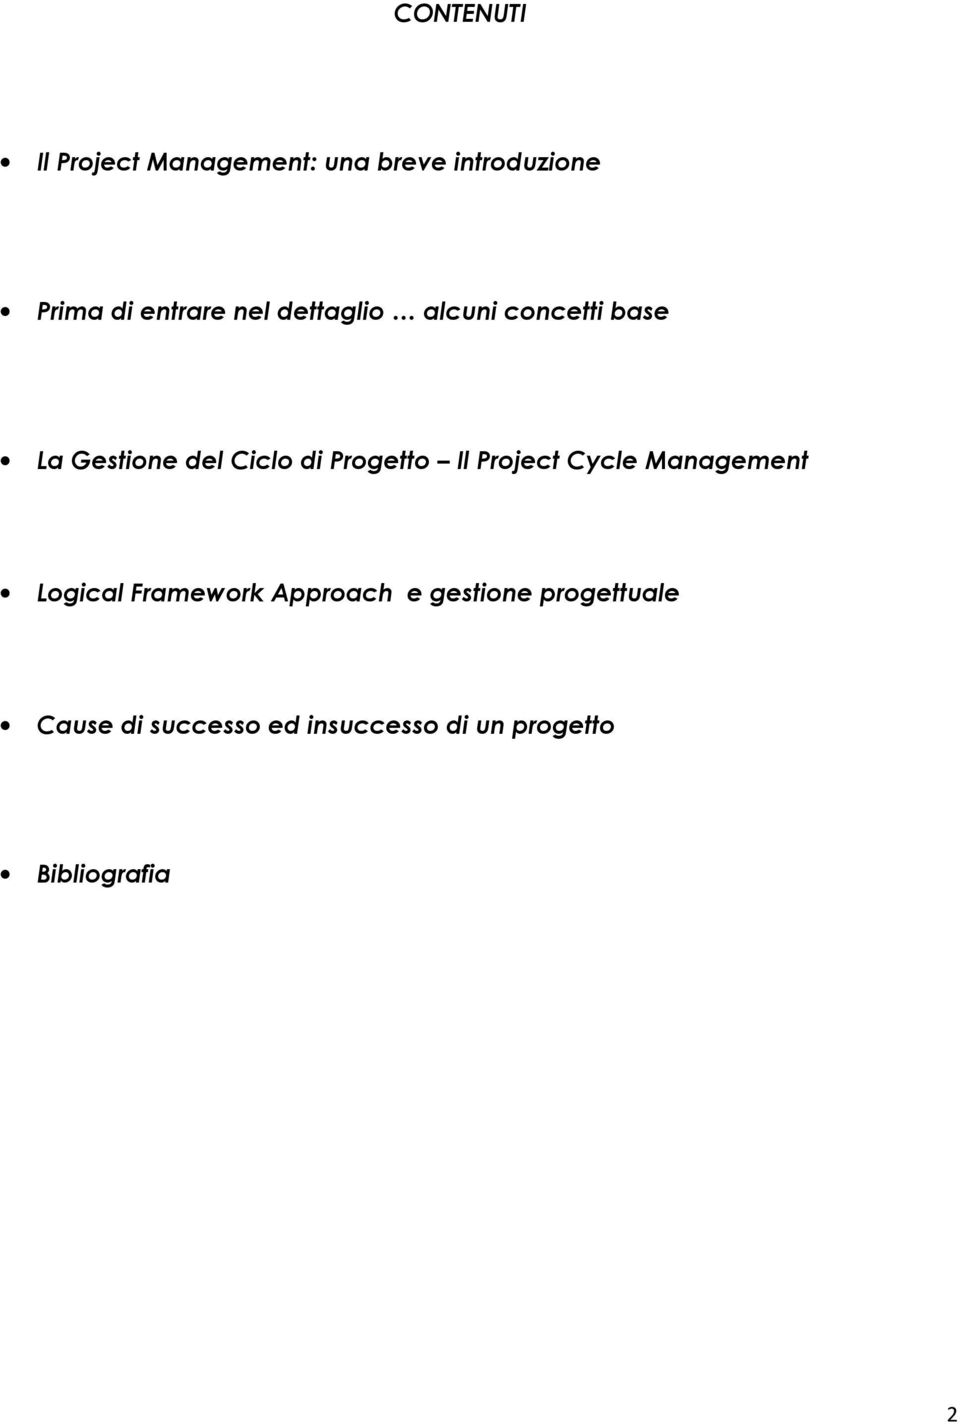 Progetto Il Project Cycle Management Logical Framework Approach e